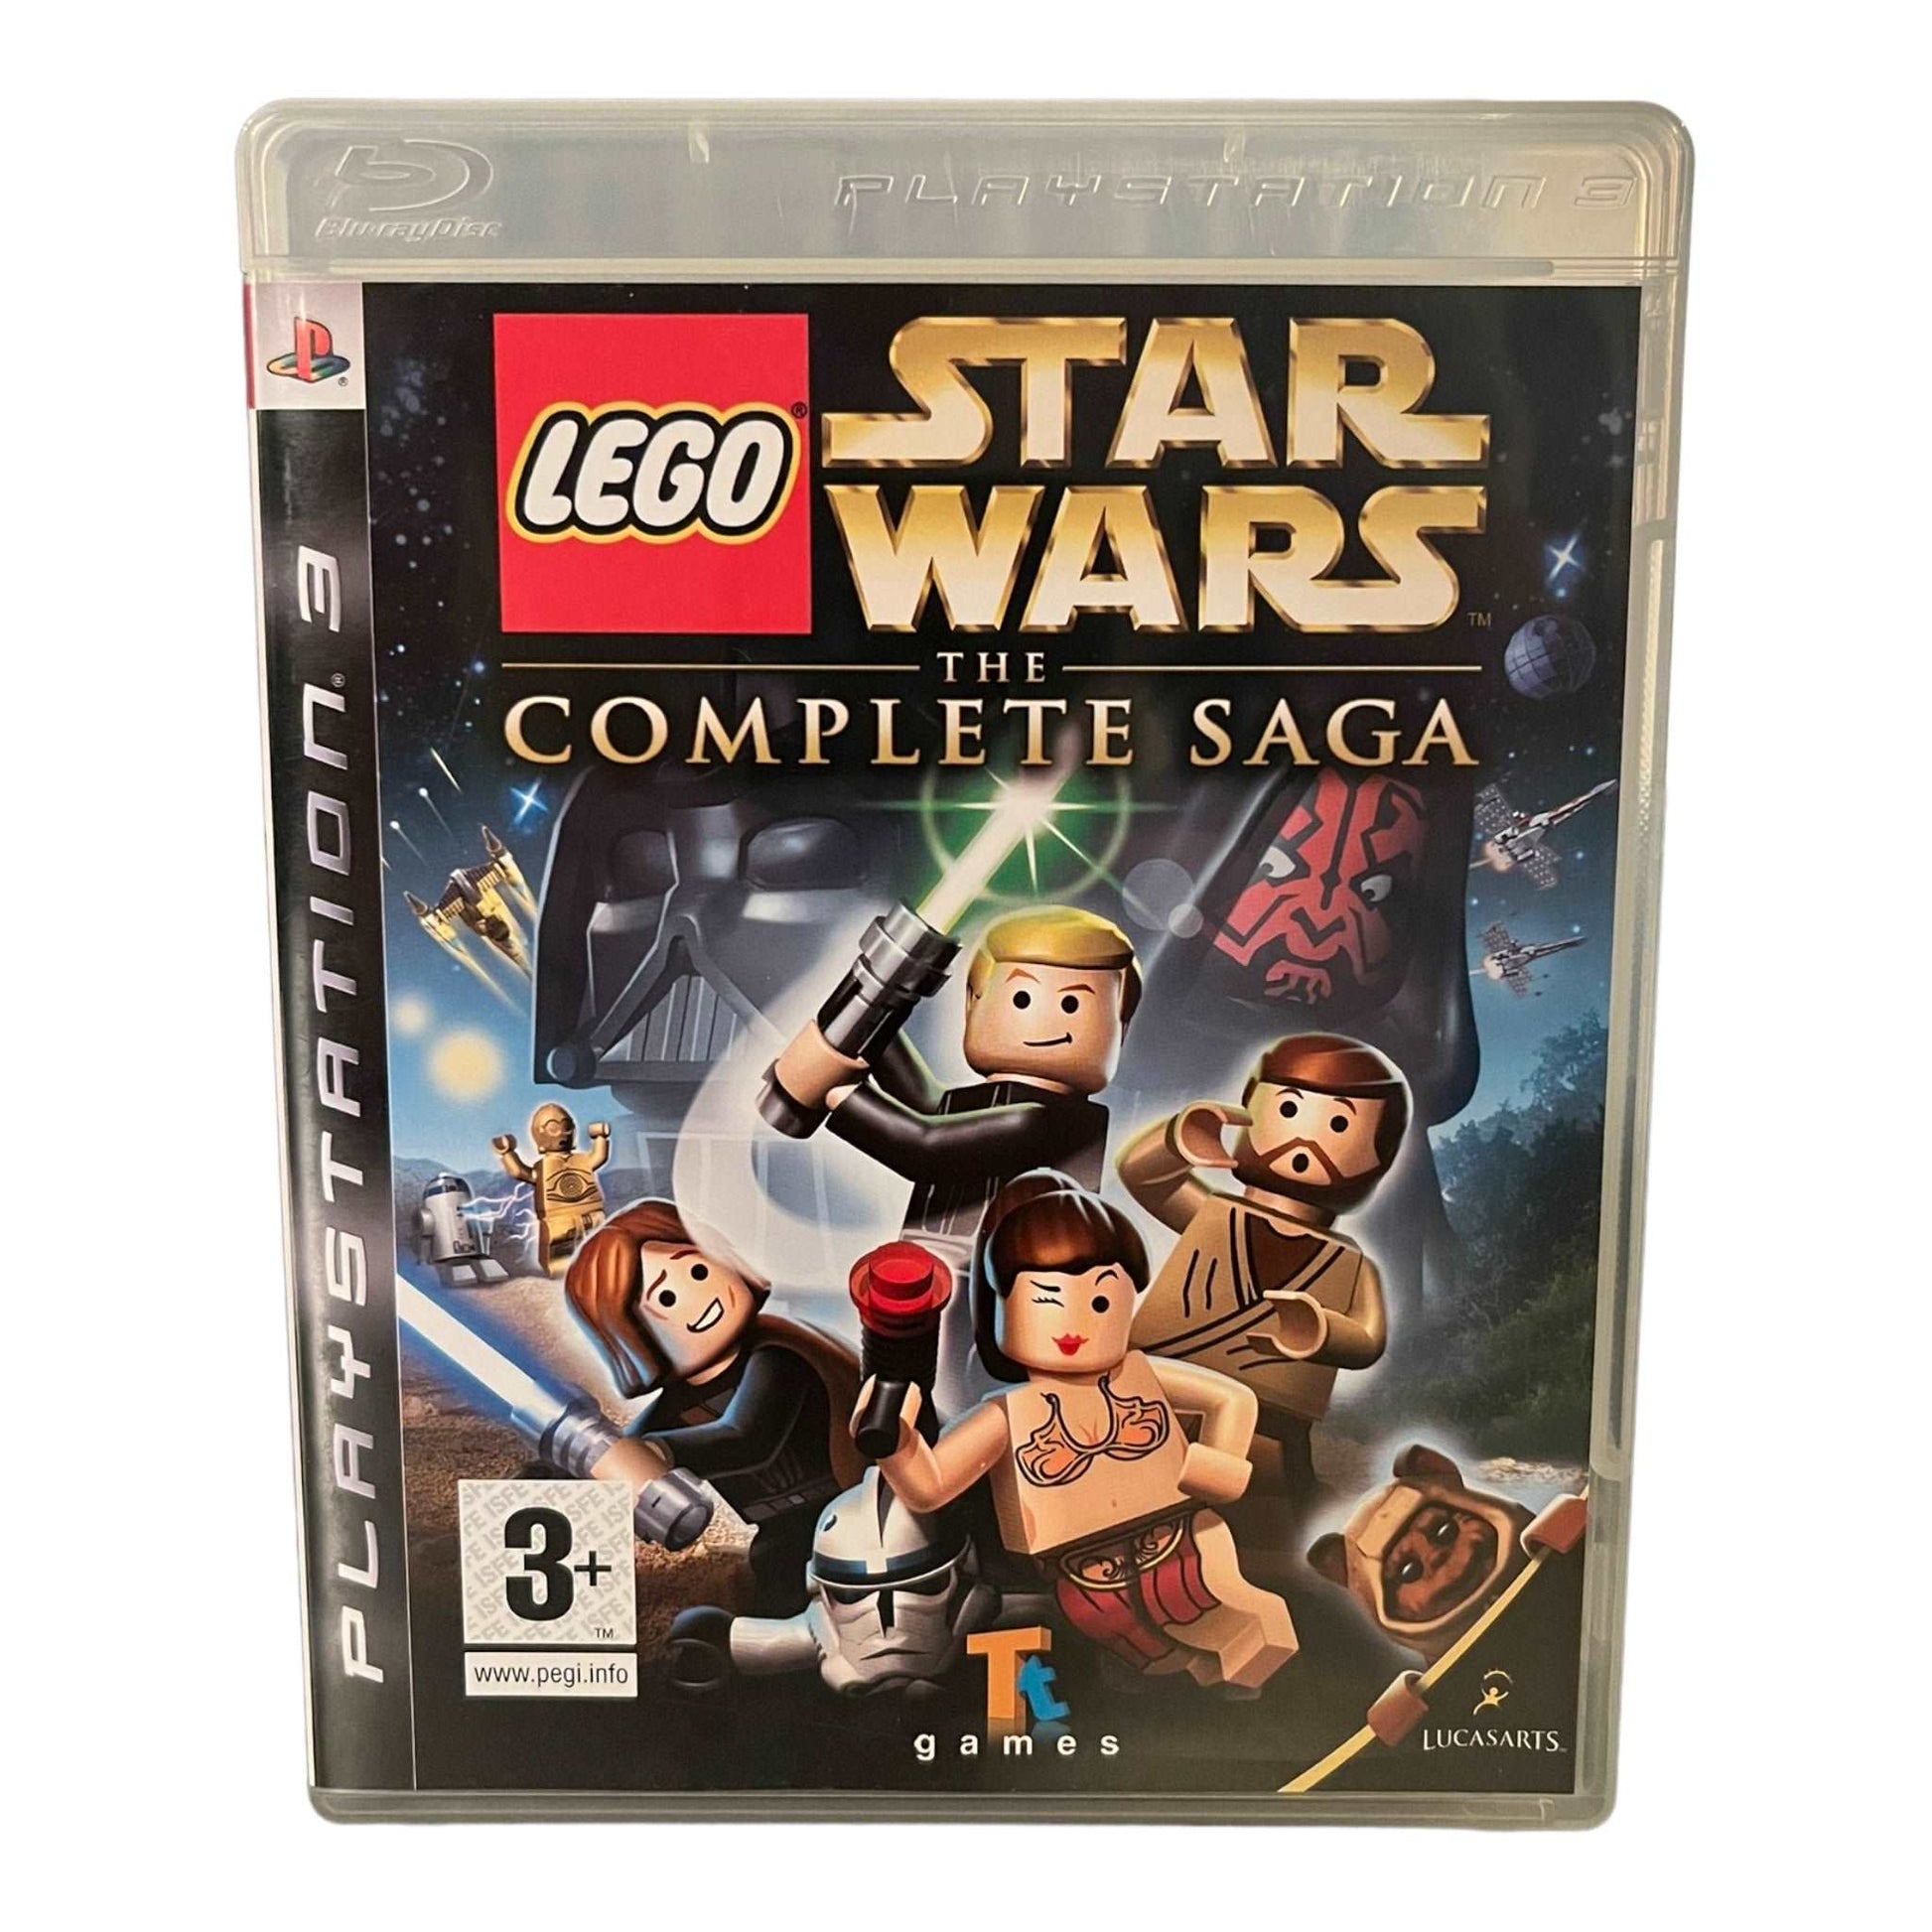 LEGO Star Wars: The Complete Saga - PS3